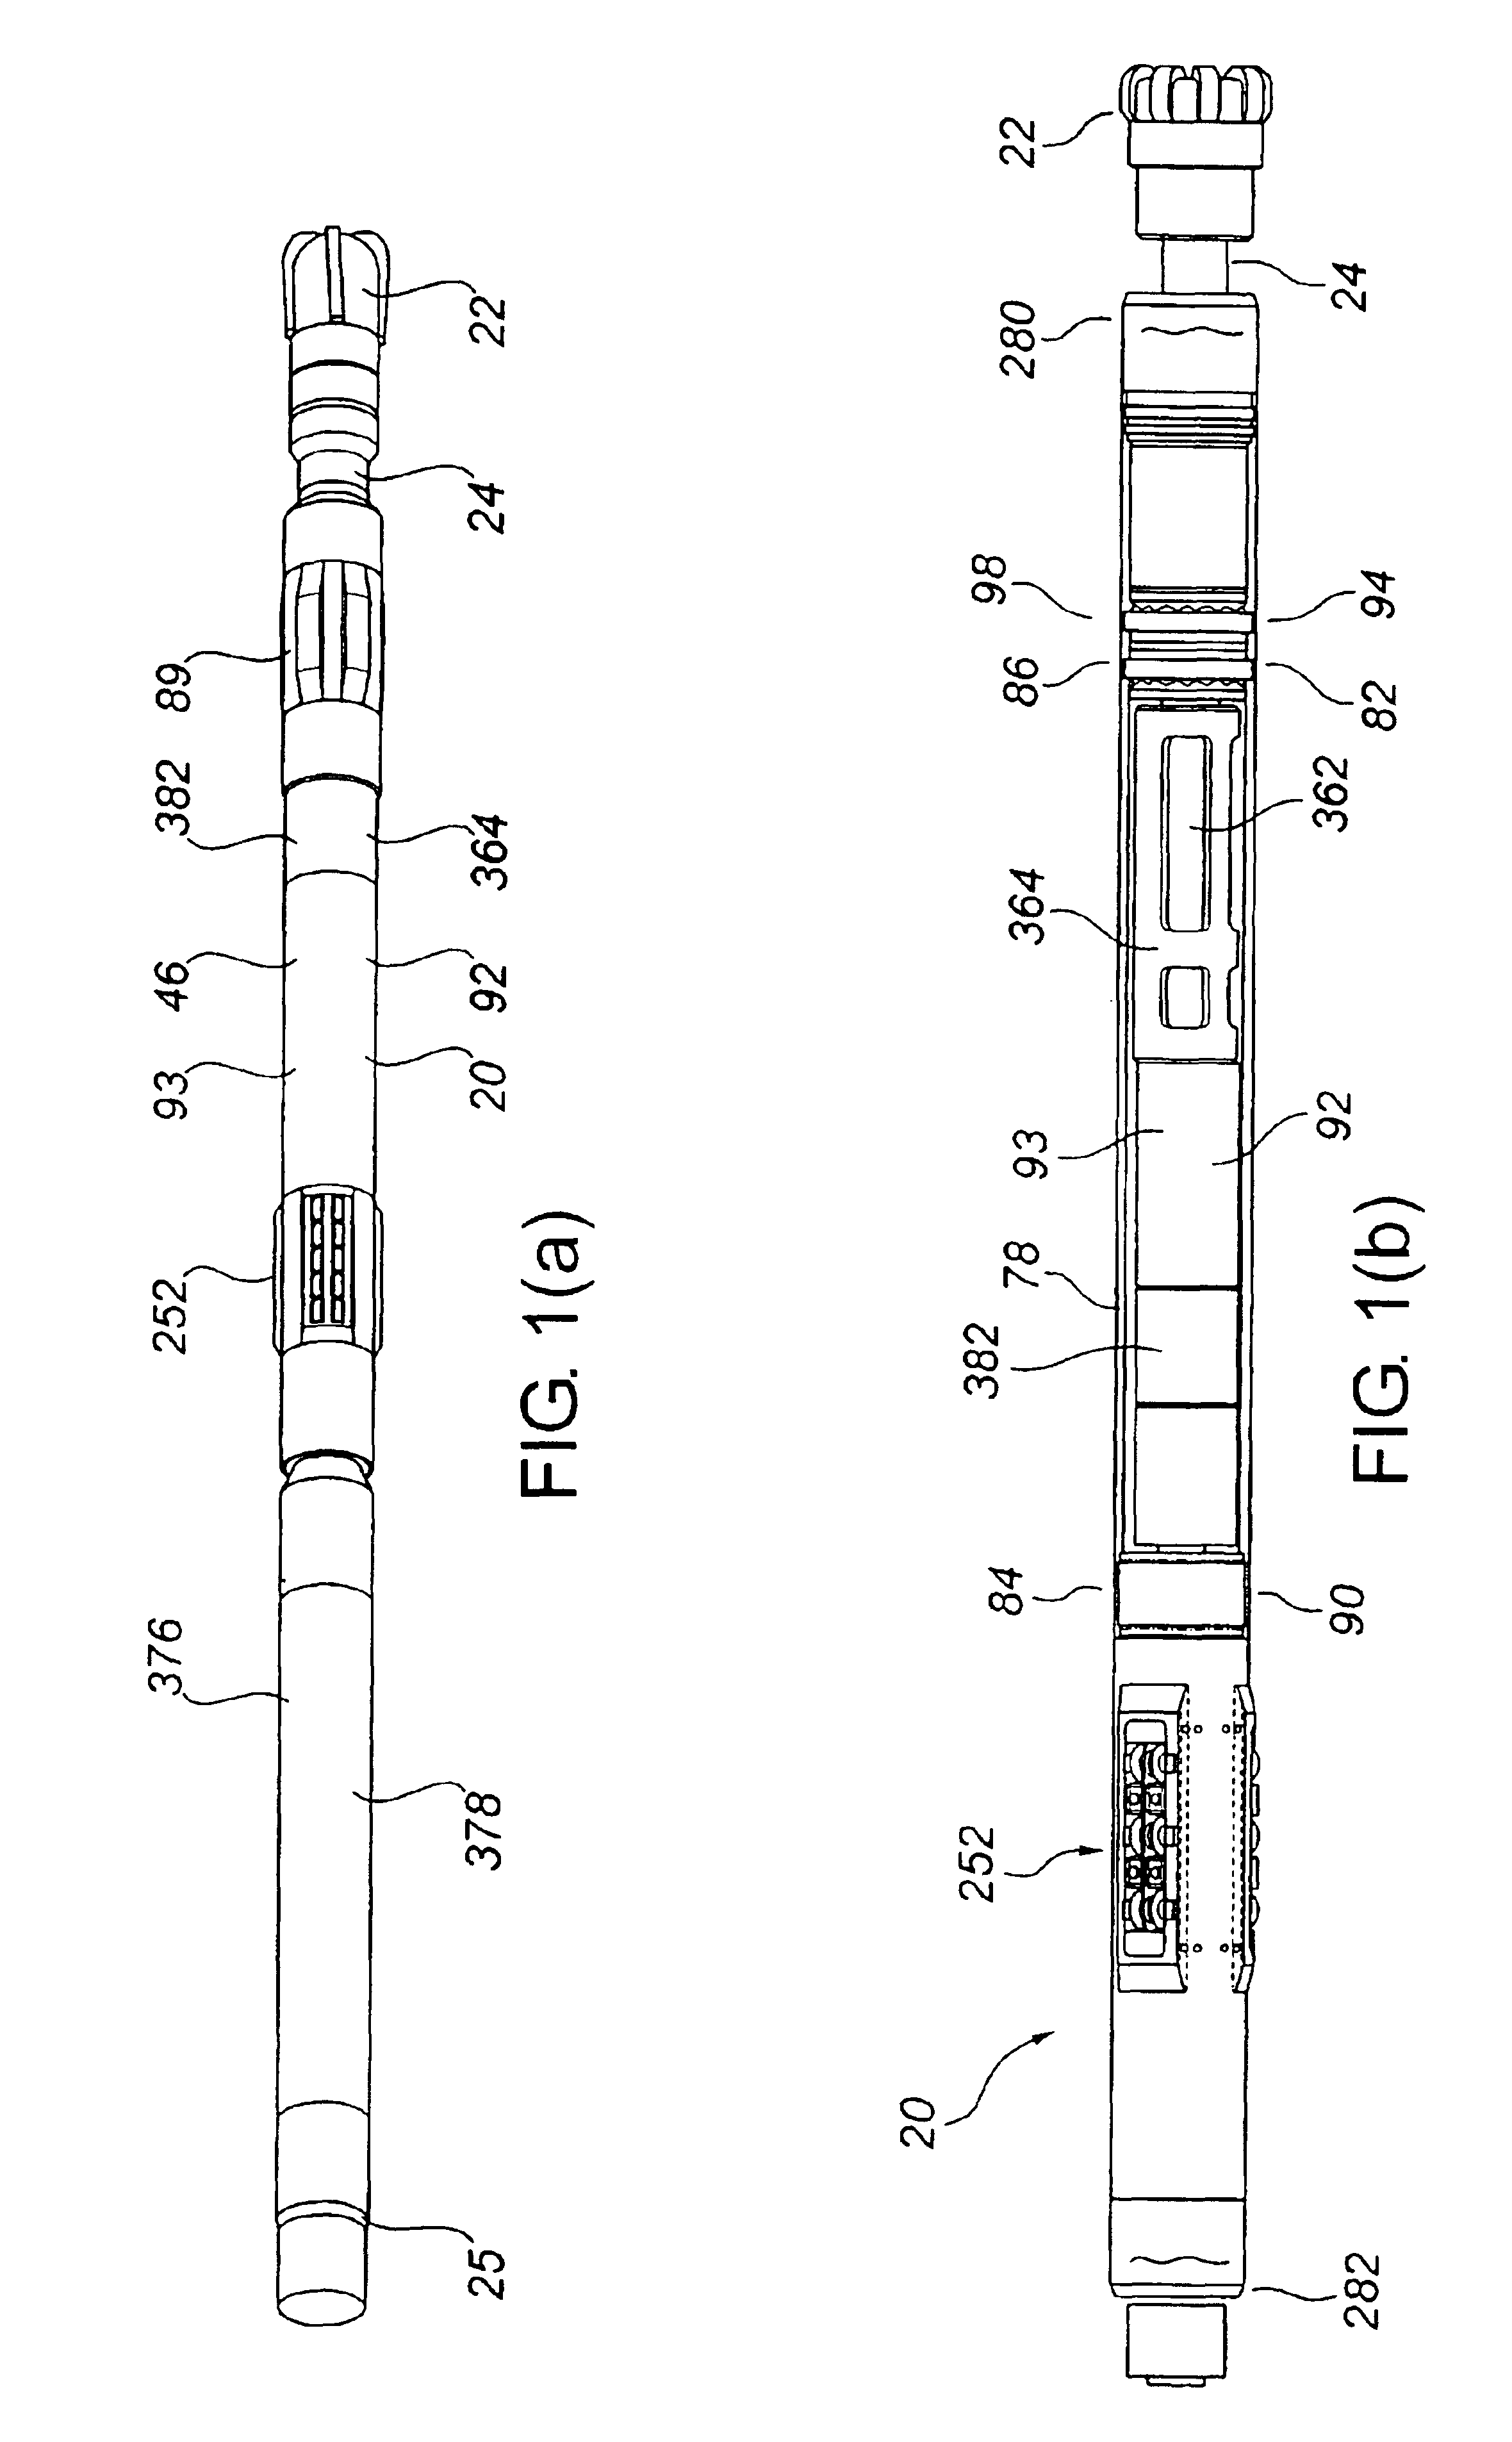 Drill tool shaft-to-housing locking device